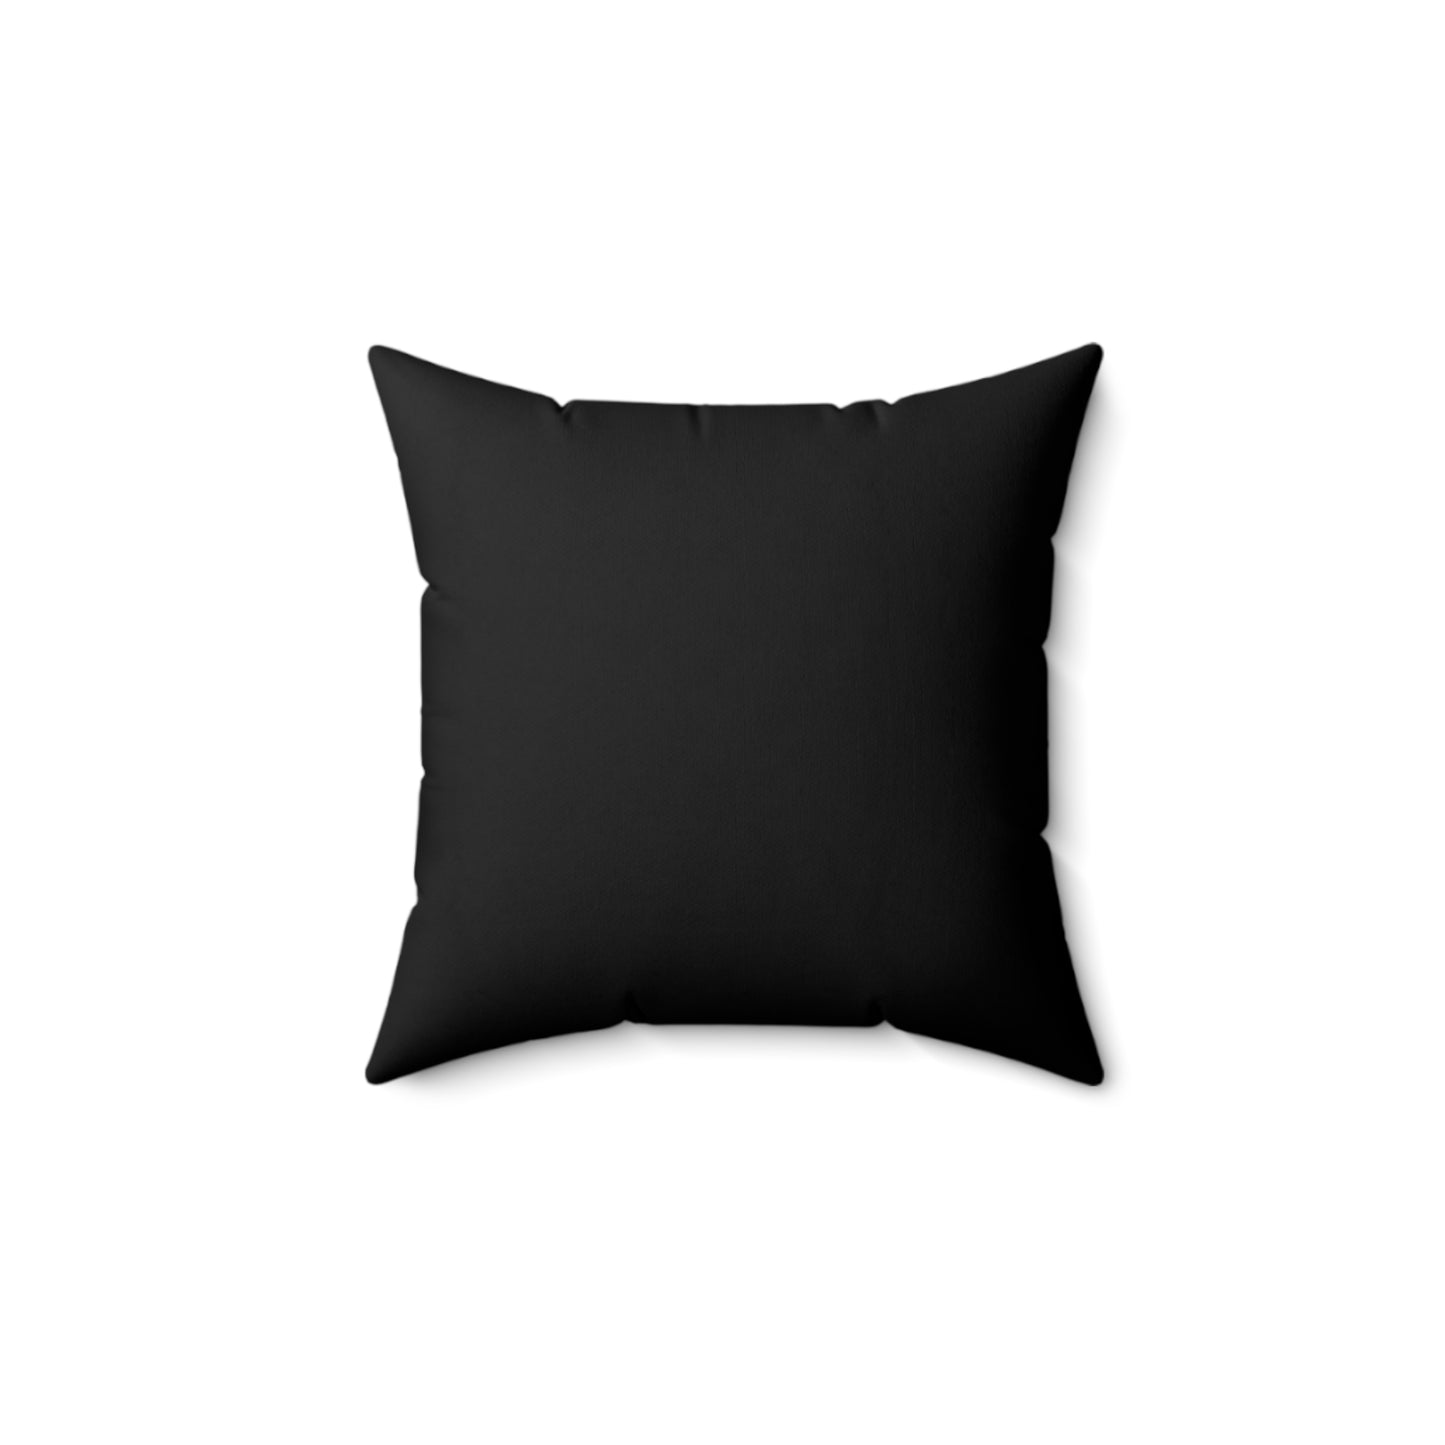 Livin' The Loaf Life- Square Pillow [Laze away the day!]